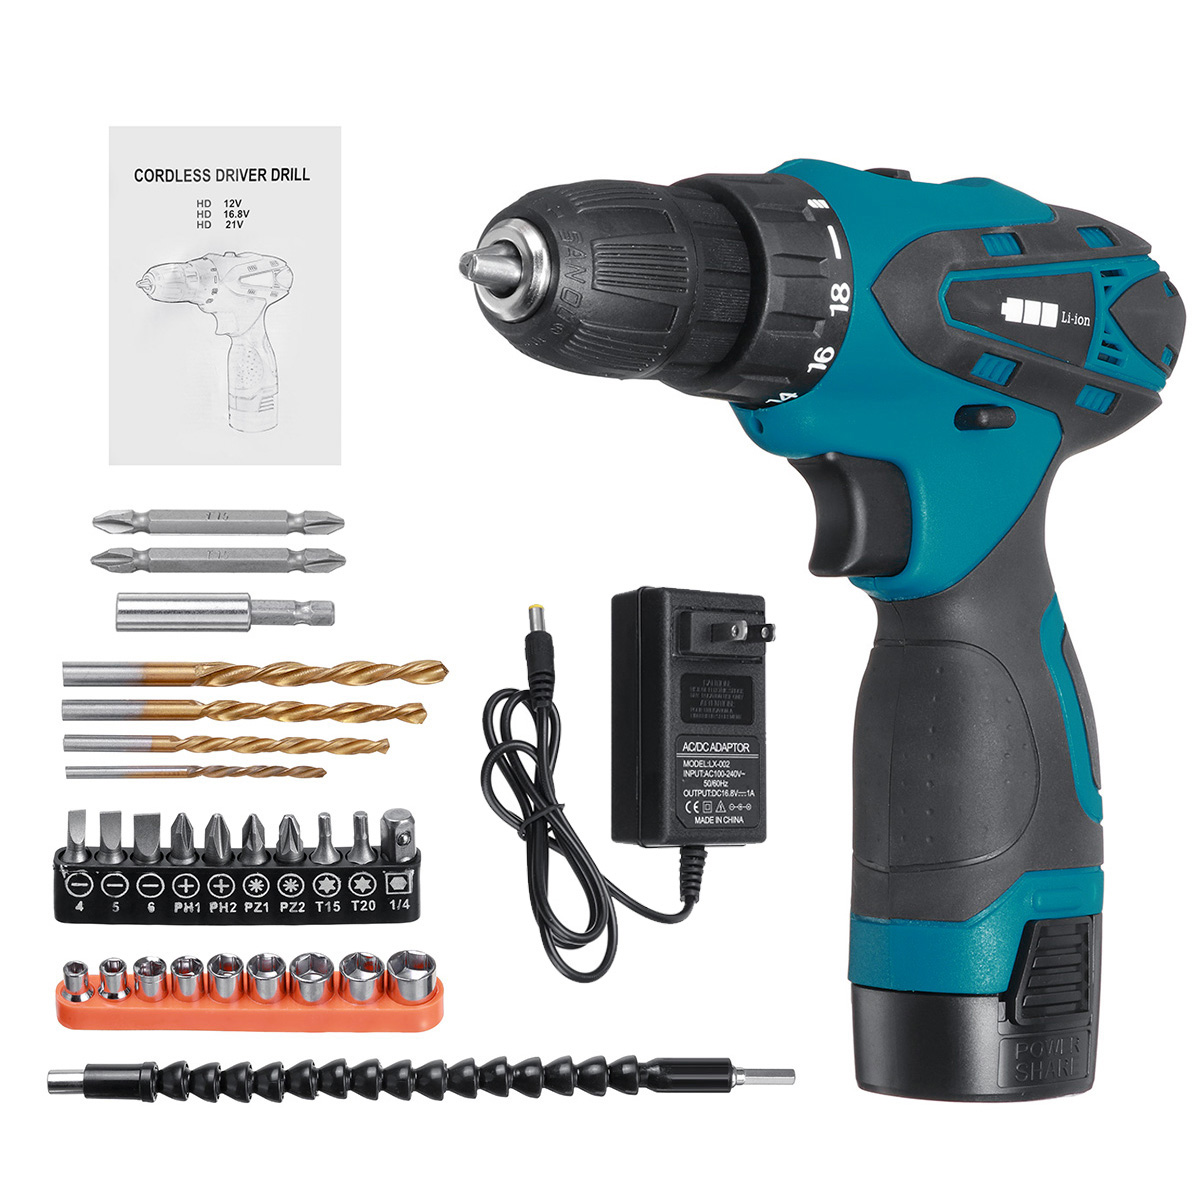 168V-Cordless-Electric-Drill-Driver-231-Torque-Multifuntional-Screwdriver-Power-Tool-W-Battery--Dril-1863336-7